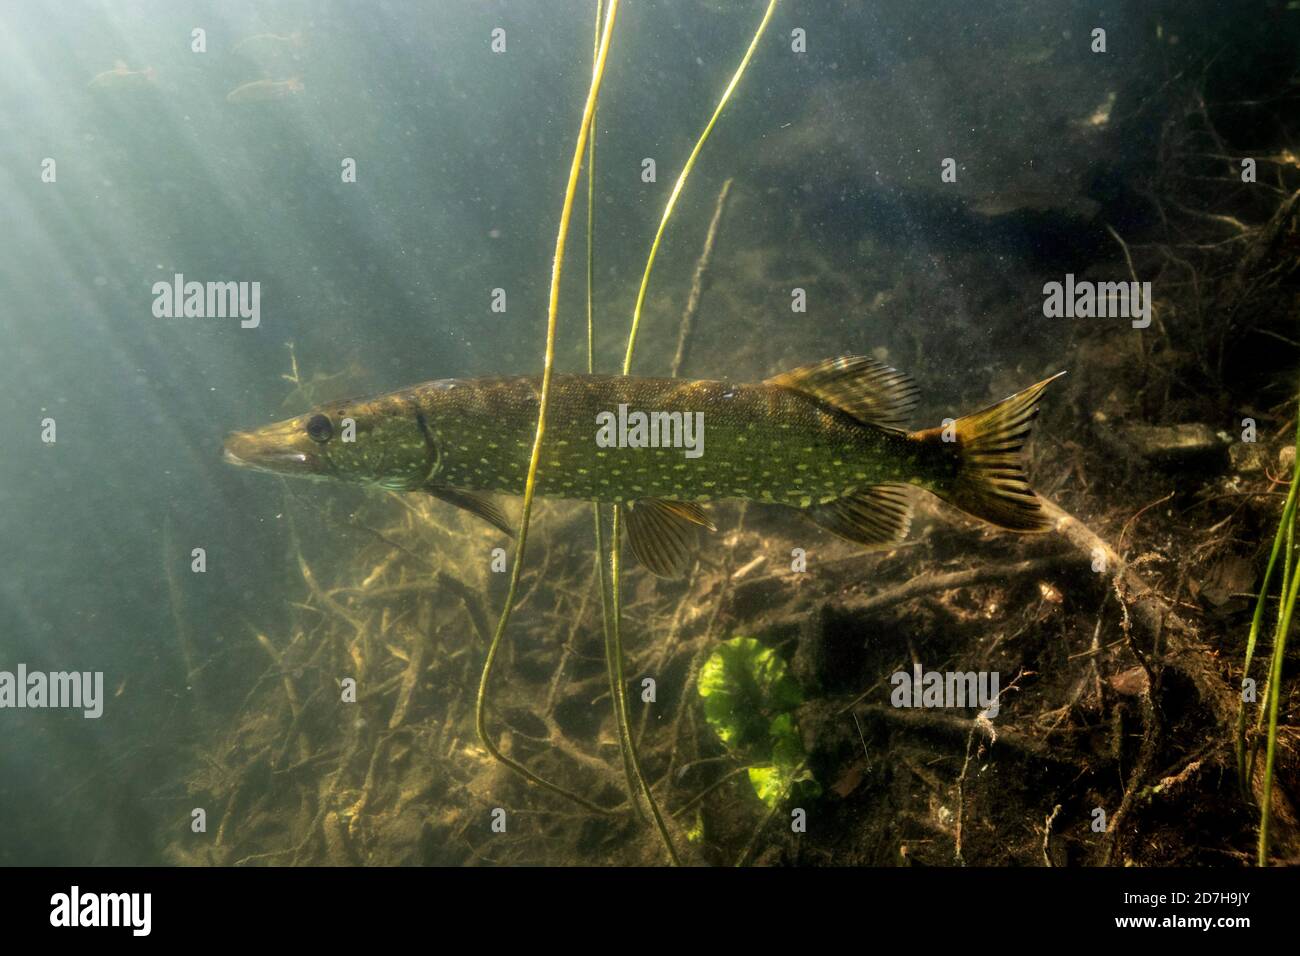 pike, northern pike (Esox lucius), lurking for prey fish in back light, side view, Germany, Bavaria Stock Photo